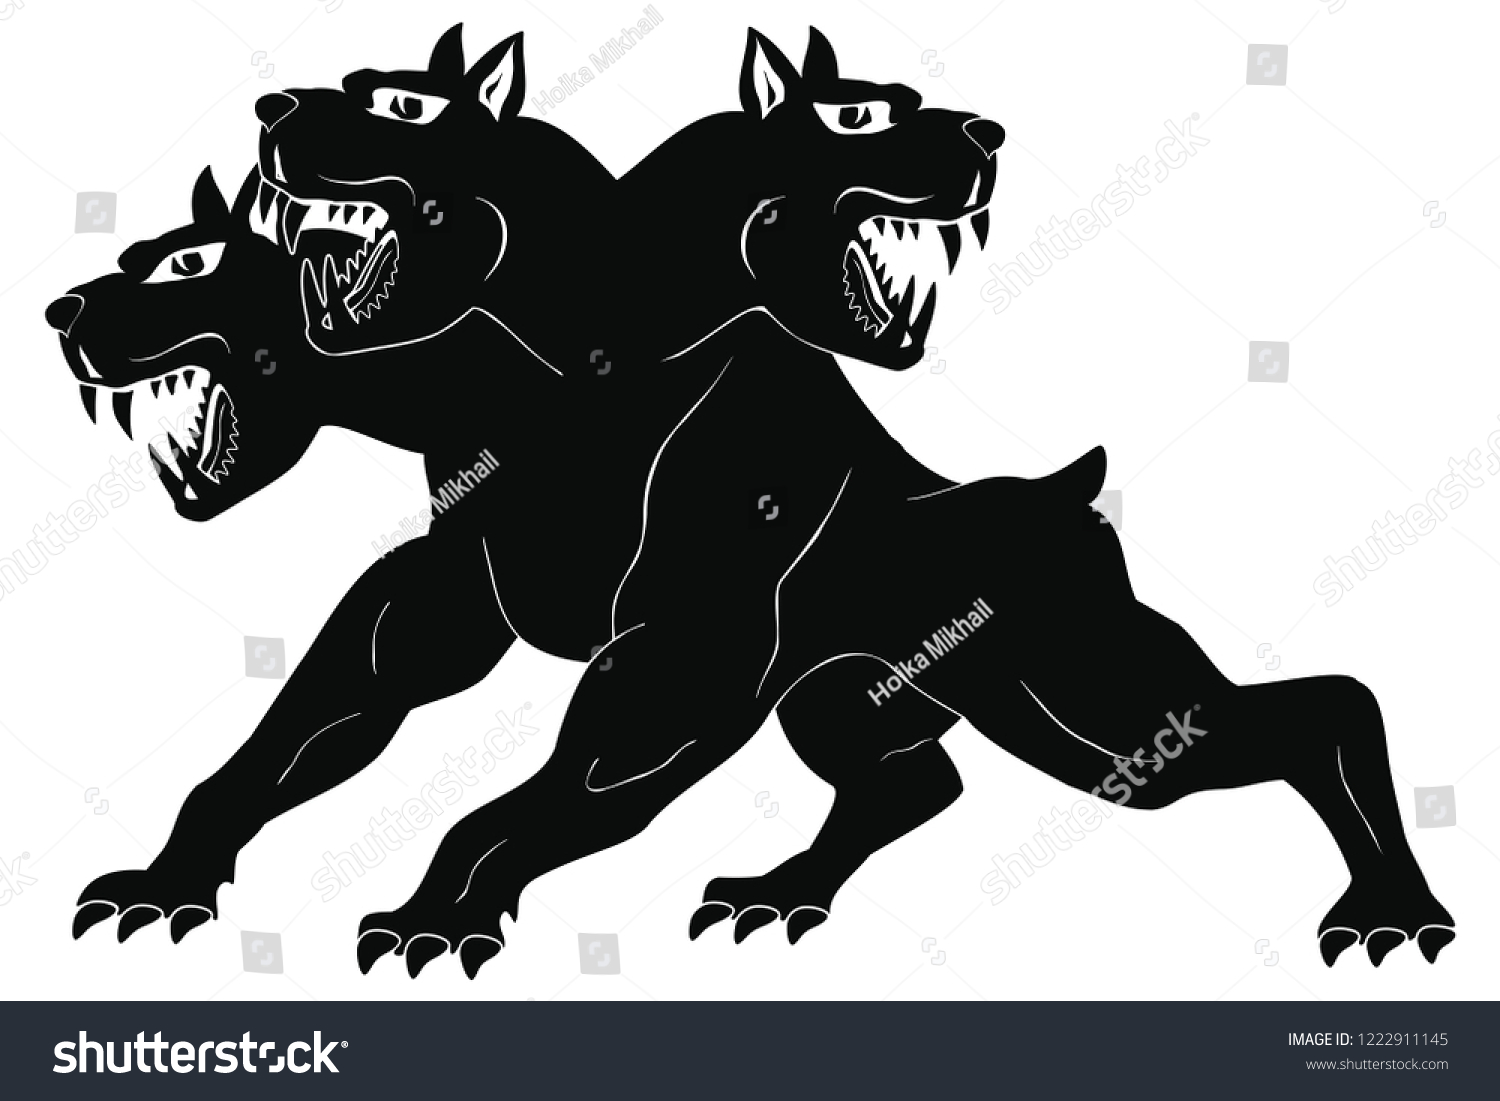 SVG of Angry three-headed dog Cerberus in attack pose. Isolated black figure on white background. svg